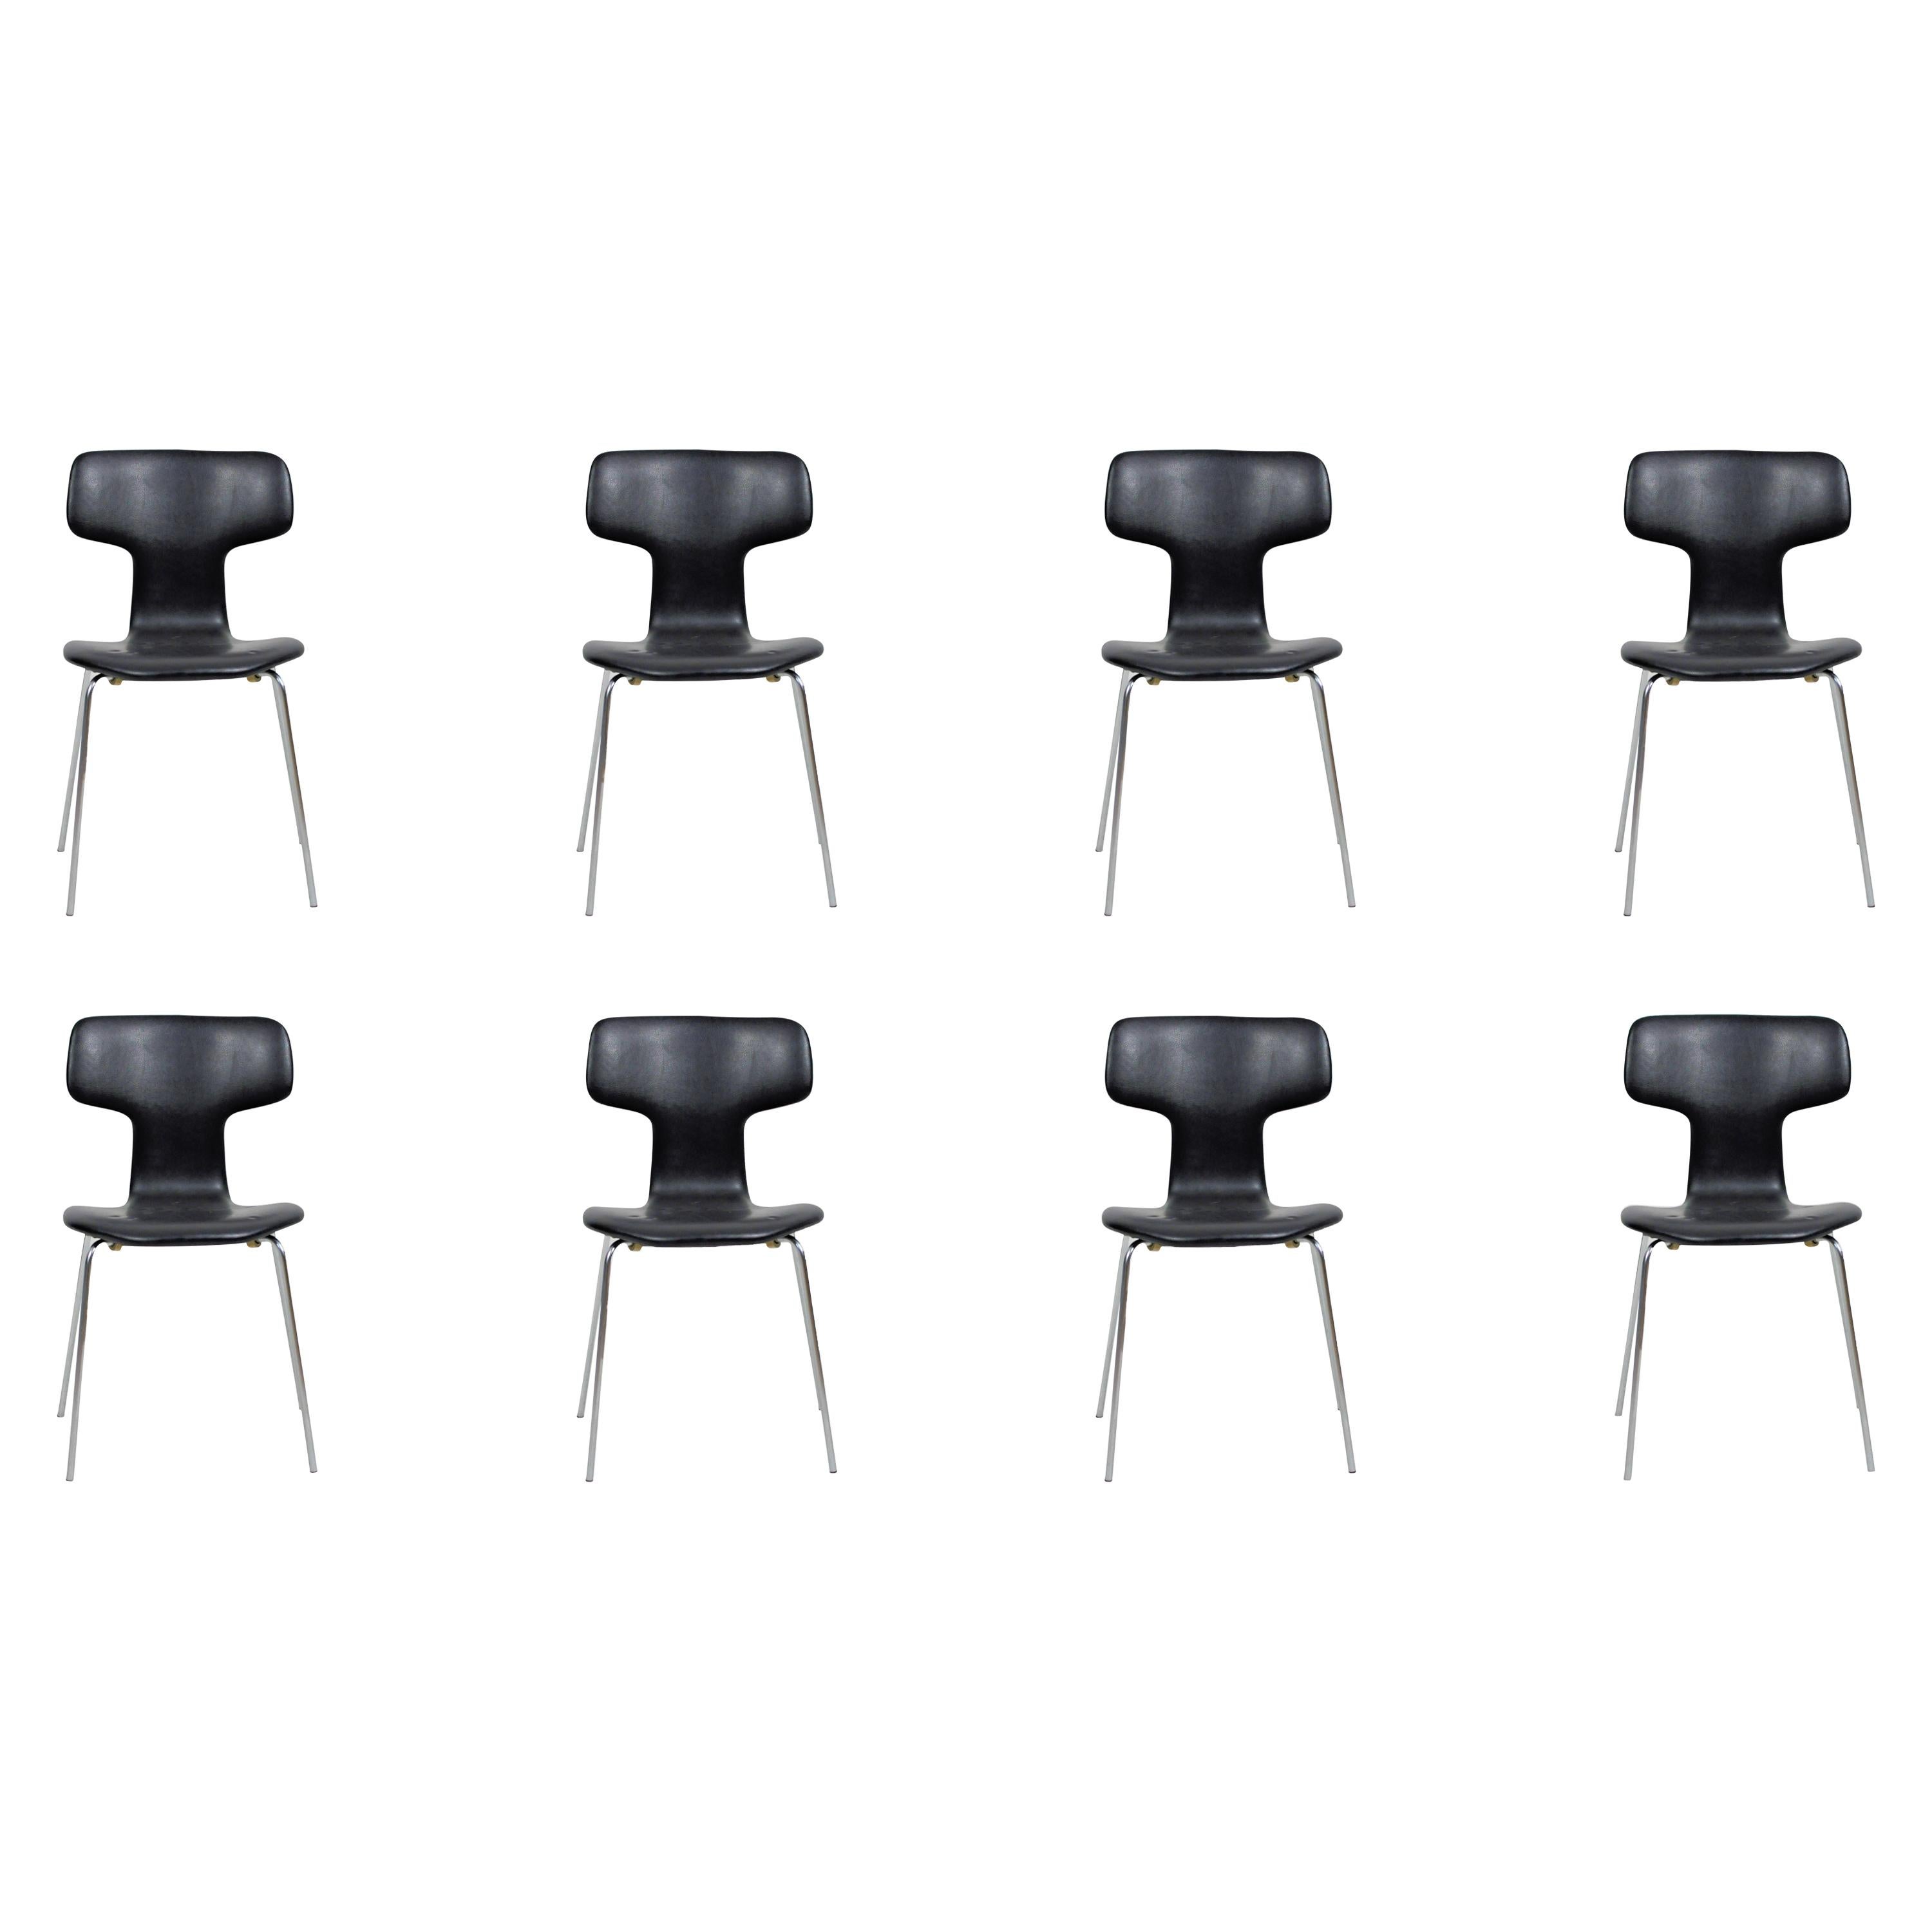 1960s Arne Jacobsen Set of Eight T Chairs or Hammer Chairs by Fritz Hansen